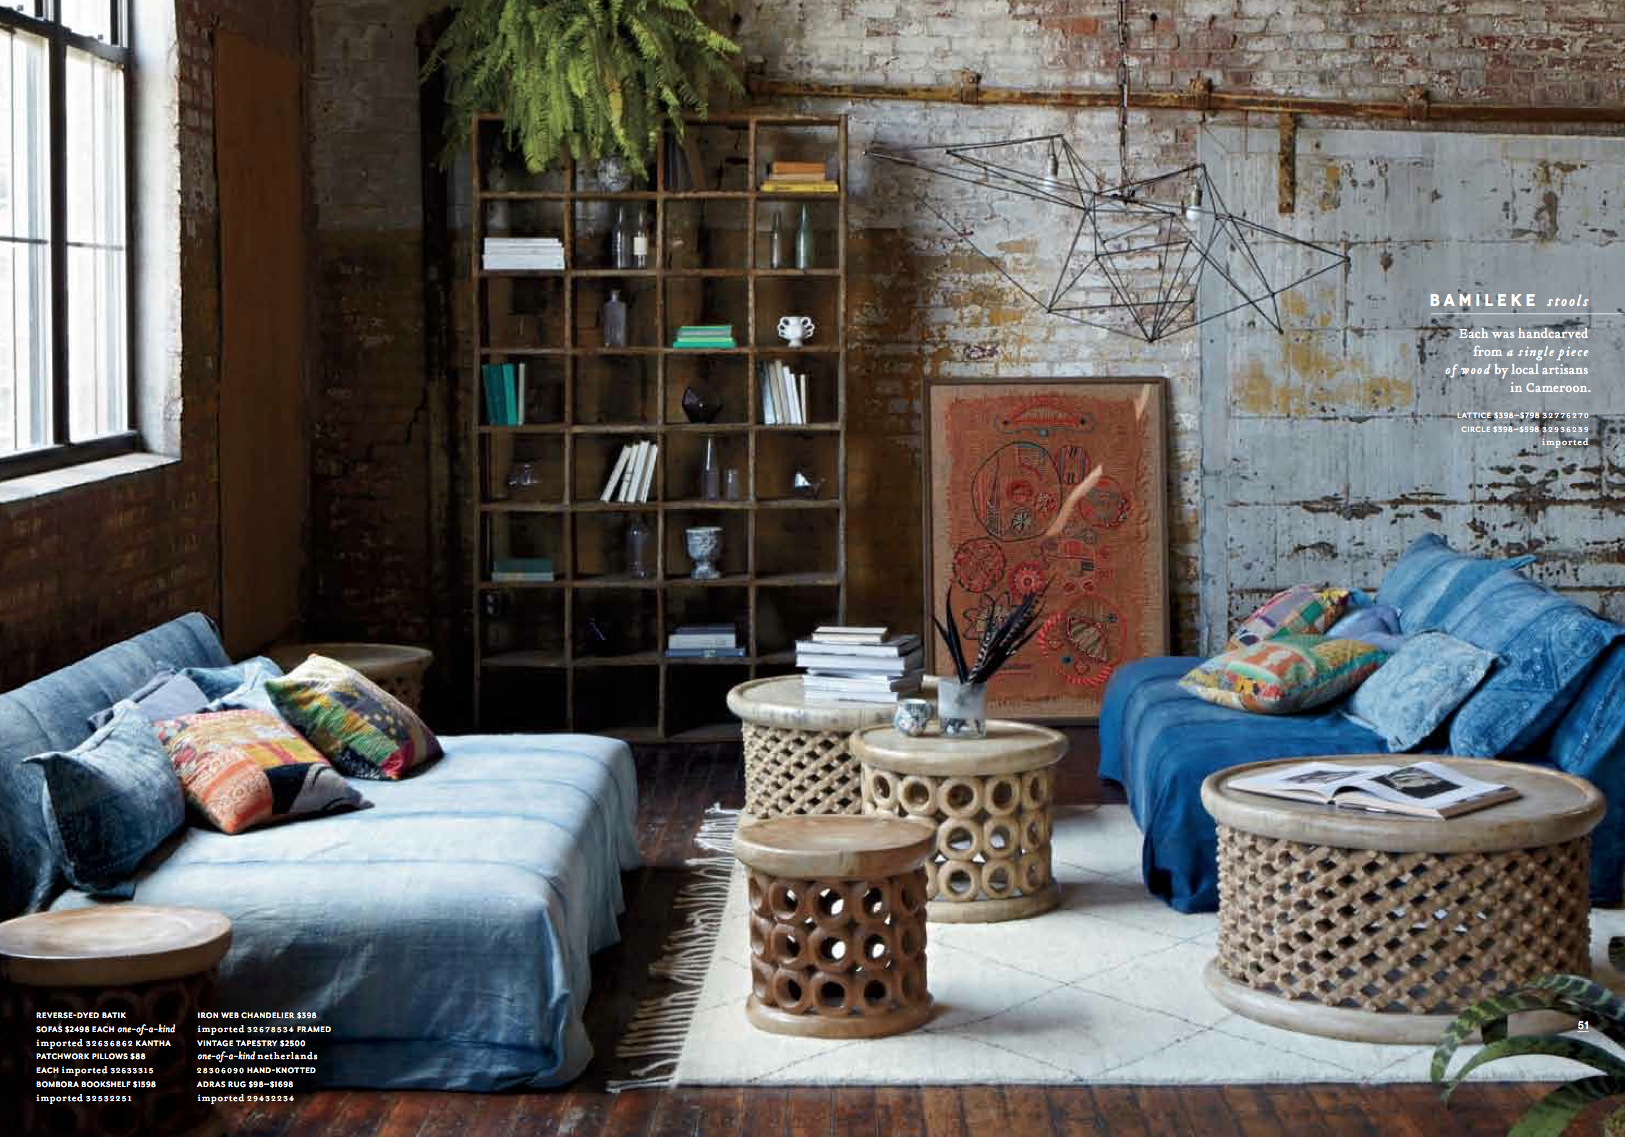  anthropologie house and home photo shoot with simon watson and county fair productions 30